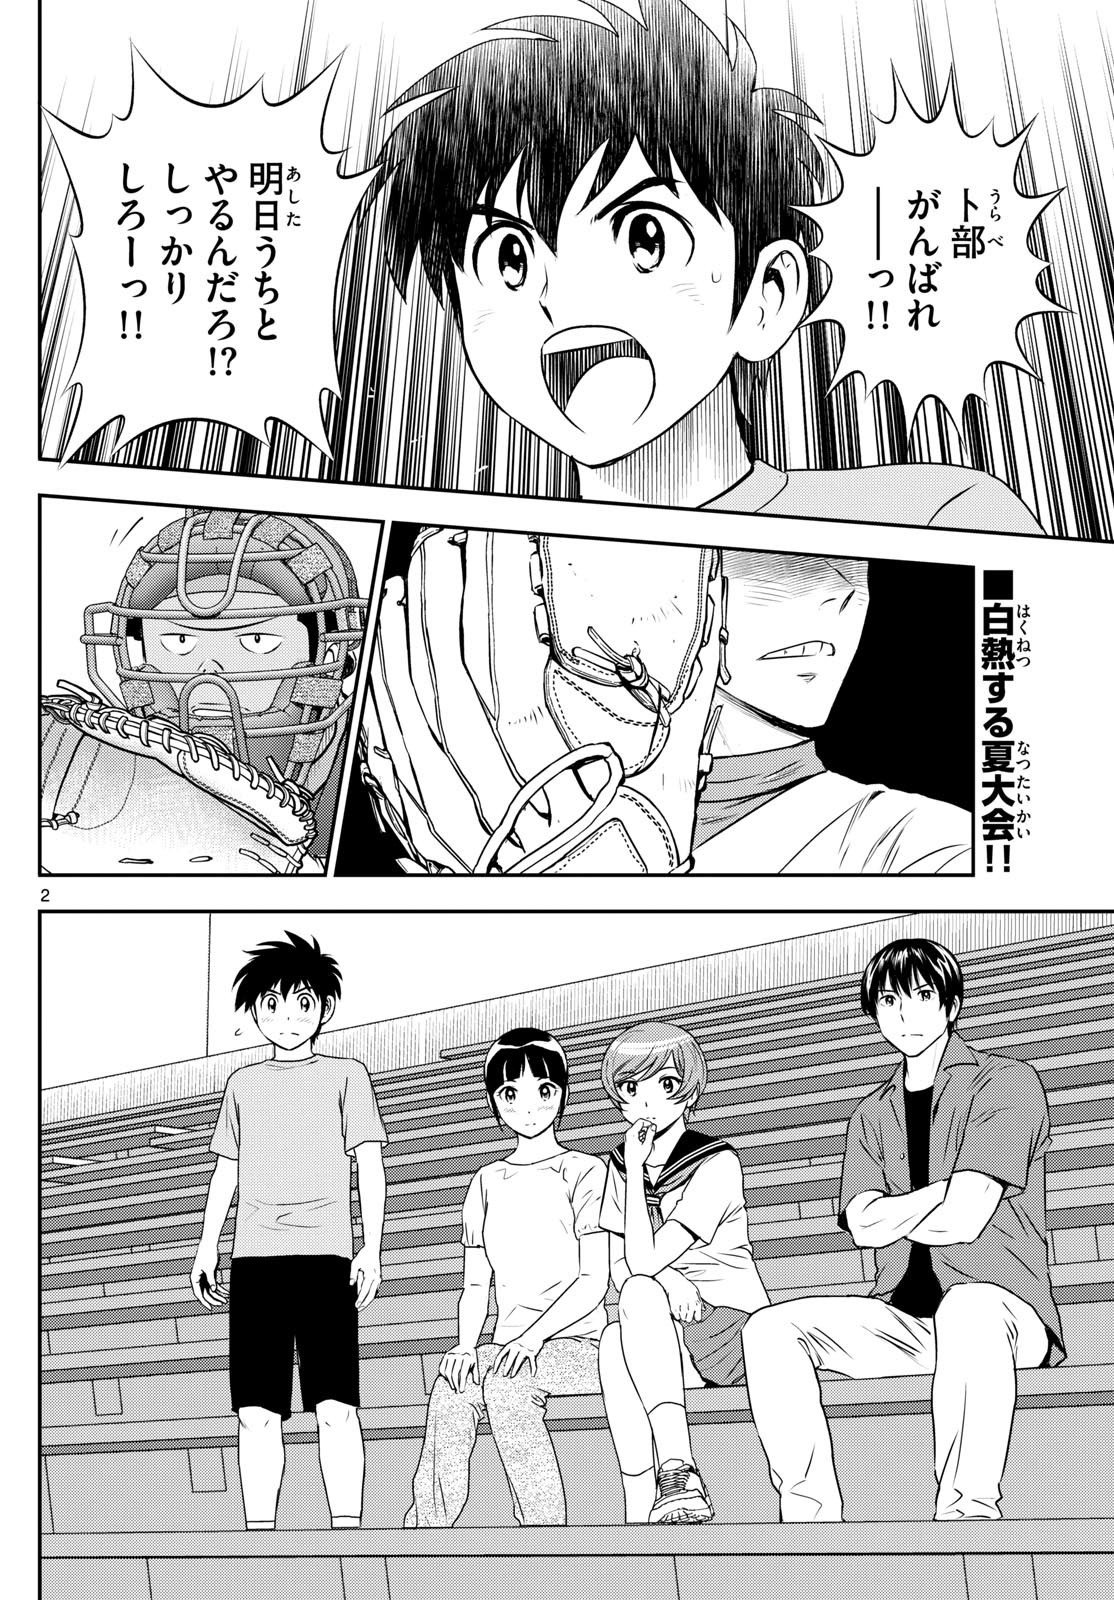 Major 2nd - メジャーセカンド - Chapter 264 - Page 2